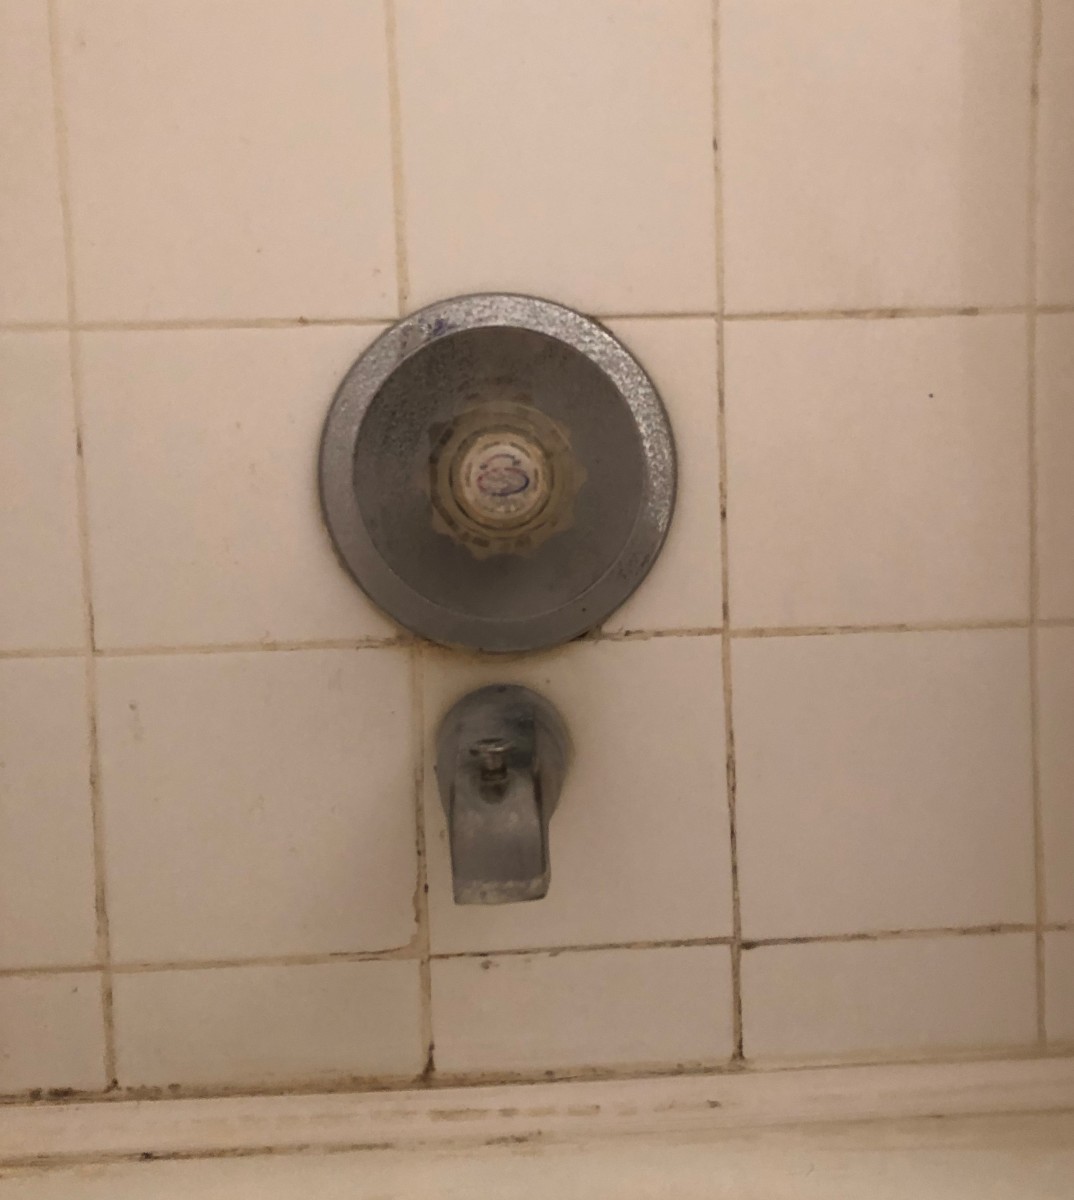 Replace A Single Handle Shower Valve, How To Install Bathtub Handles